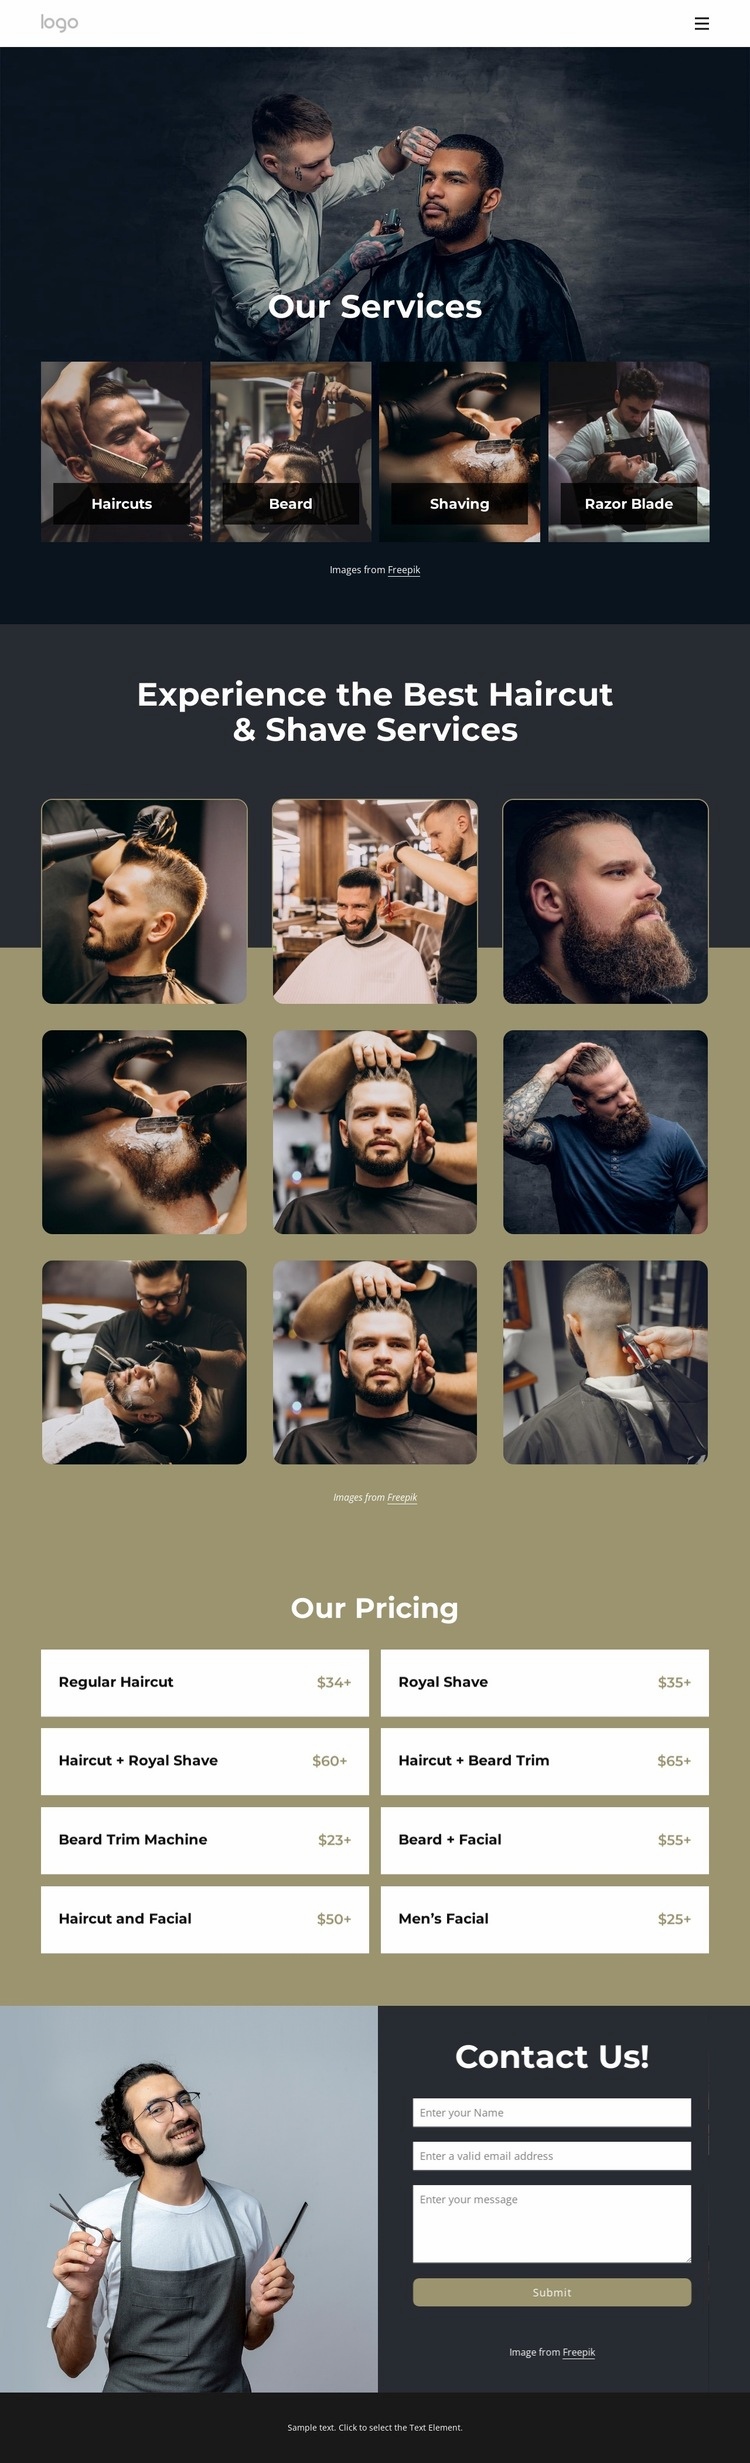 Best haircut and shave services Wysiwyg Editor Html 